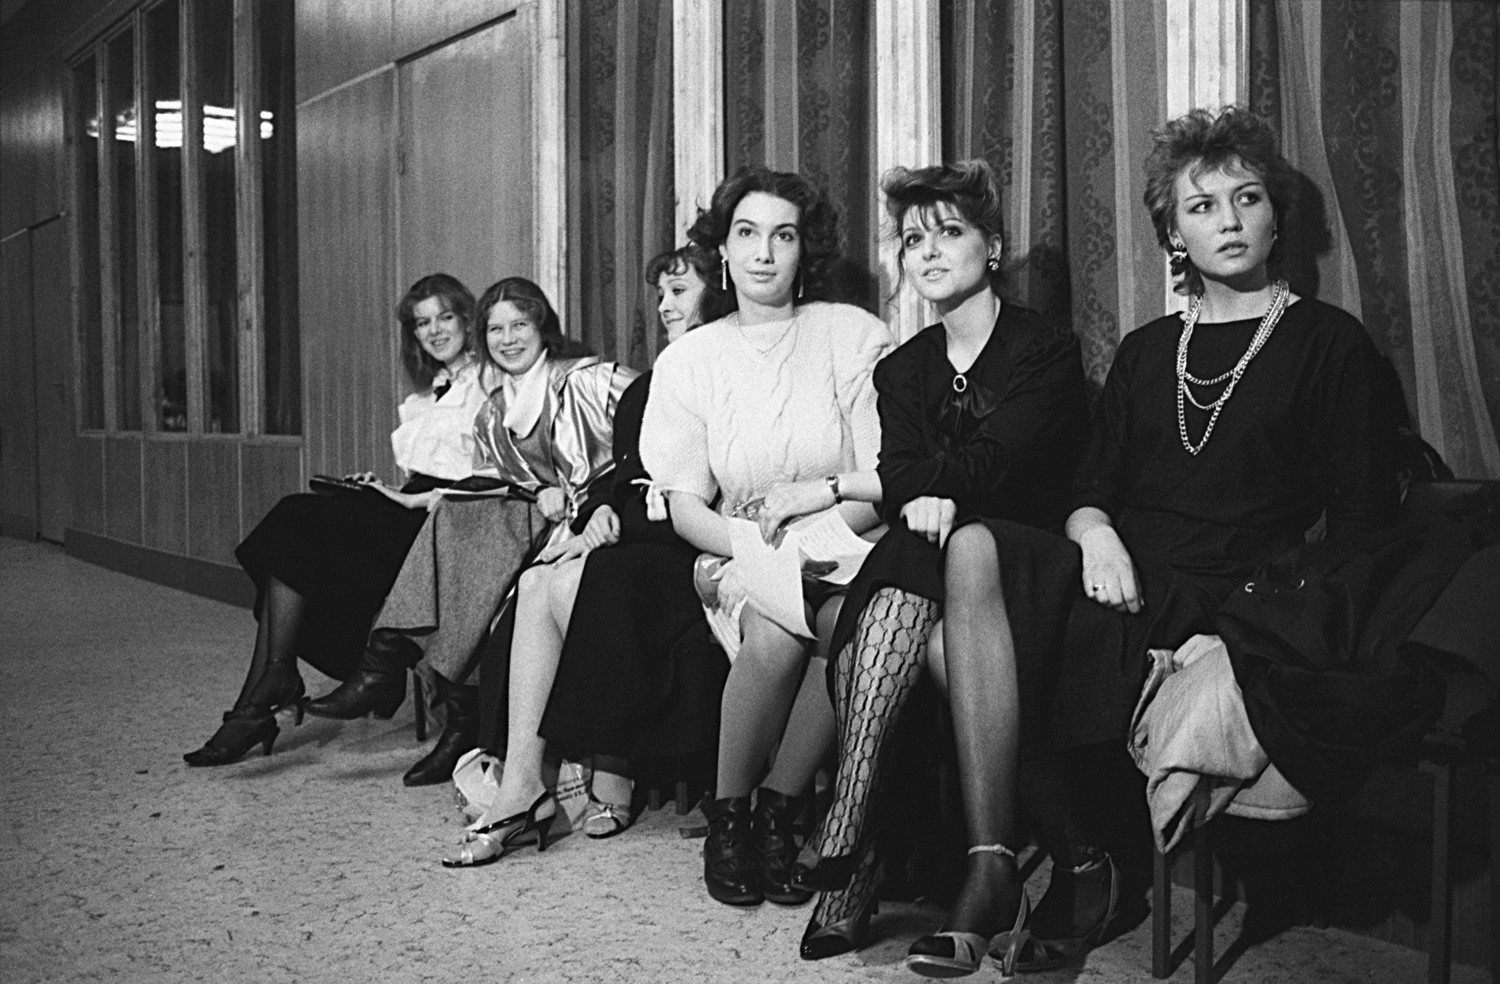 April 20, 1988. Contestants are waiting for their performance. 